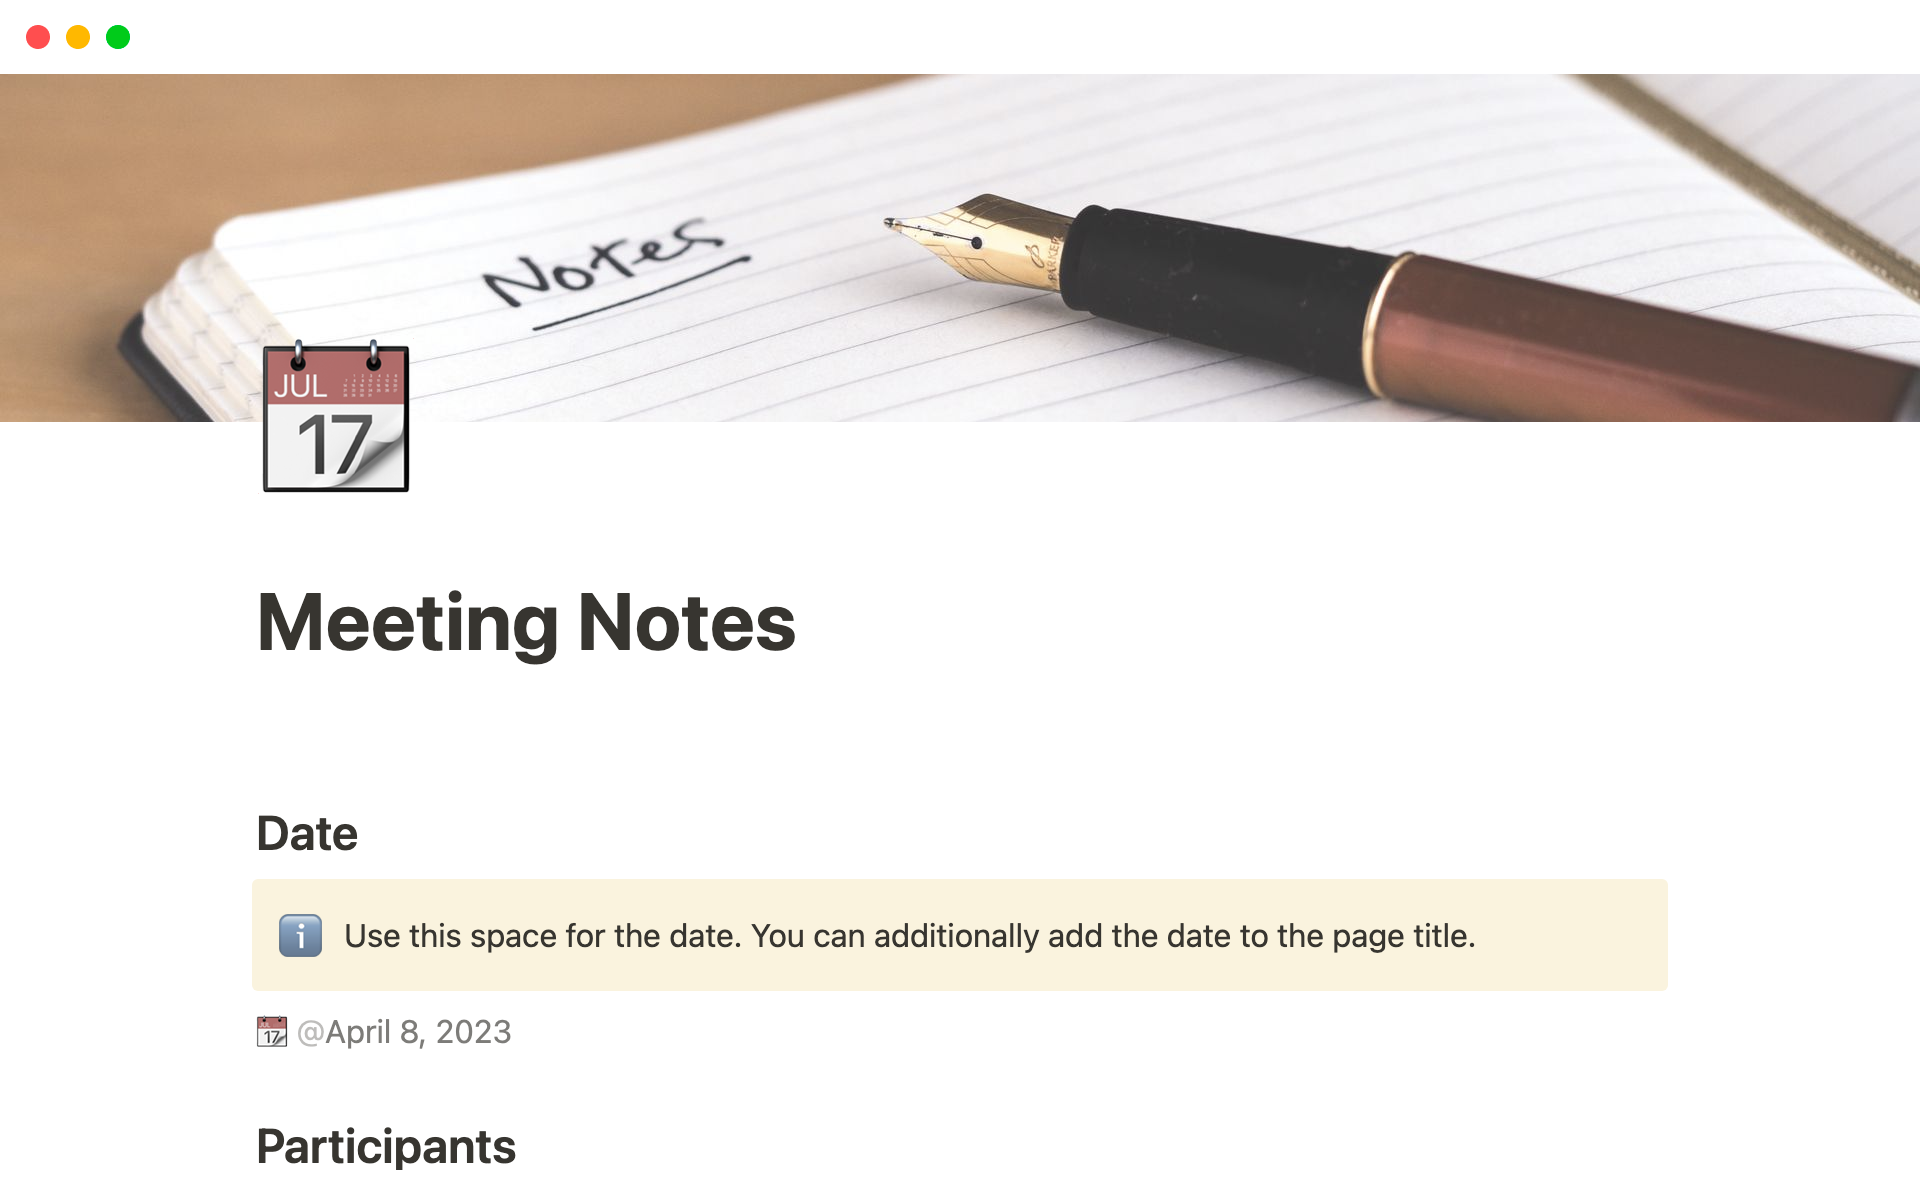 A comprehensive and organized template for taking effective meeting notes.